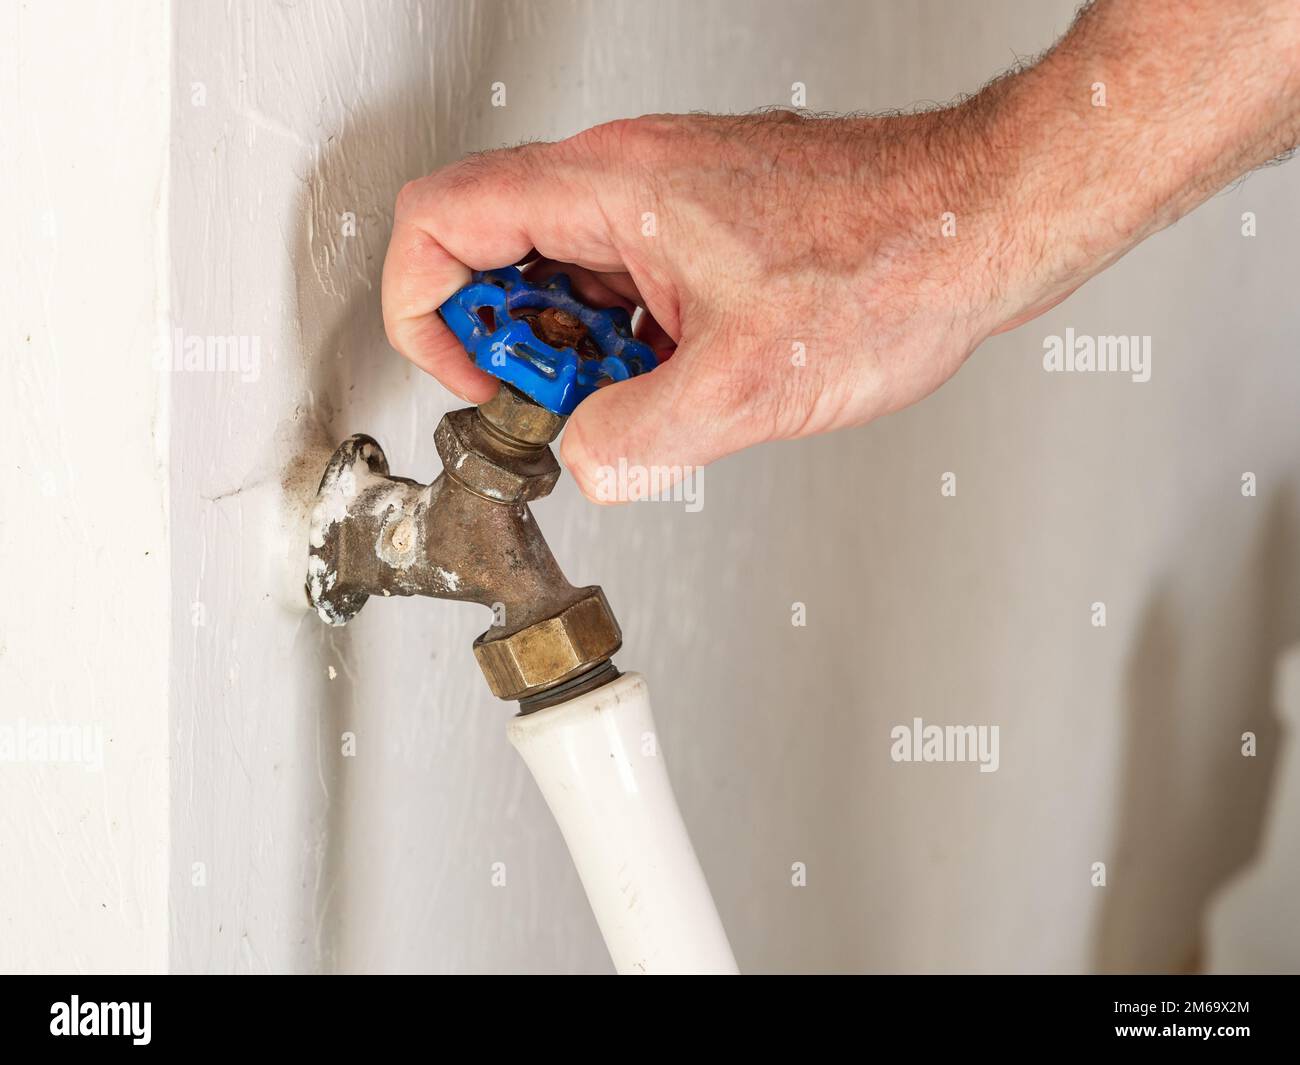 Man turning on outdoor water spigot for watering garden and lawn irrigation. Garden hose attached to a classic bronze water faucet with blue handle. Stock Photo